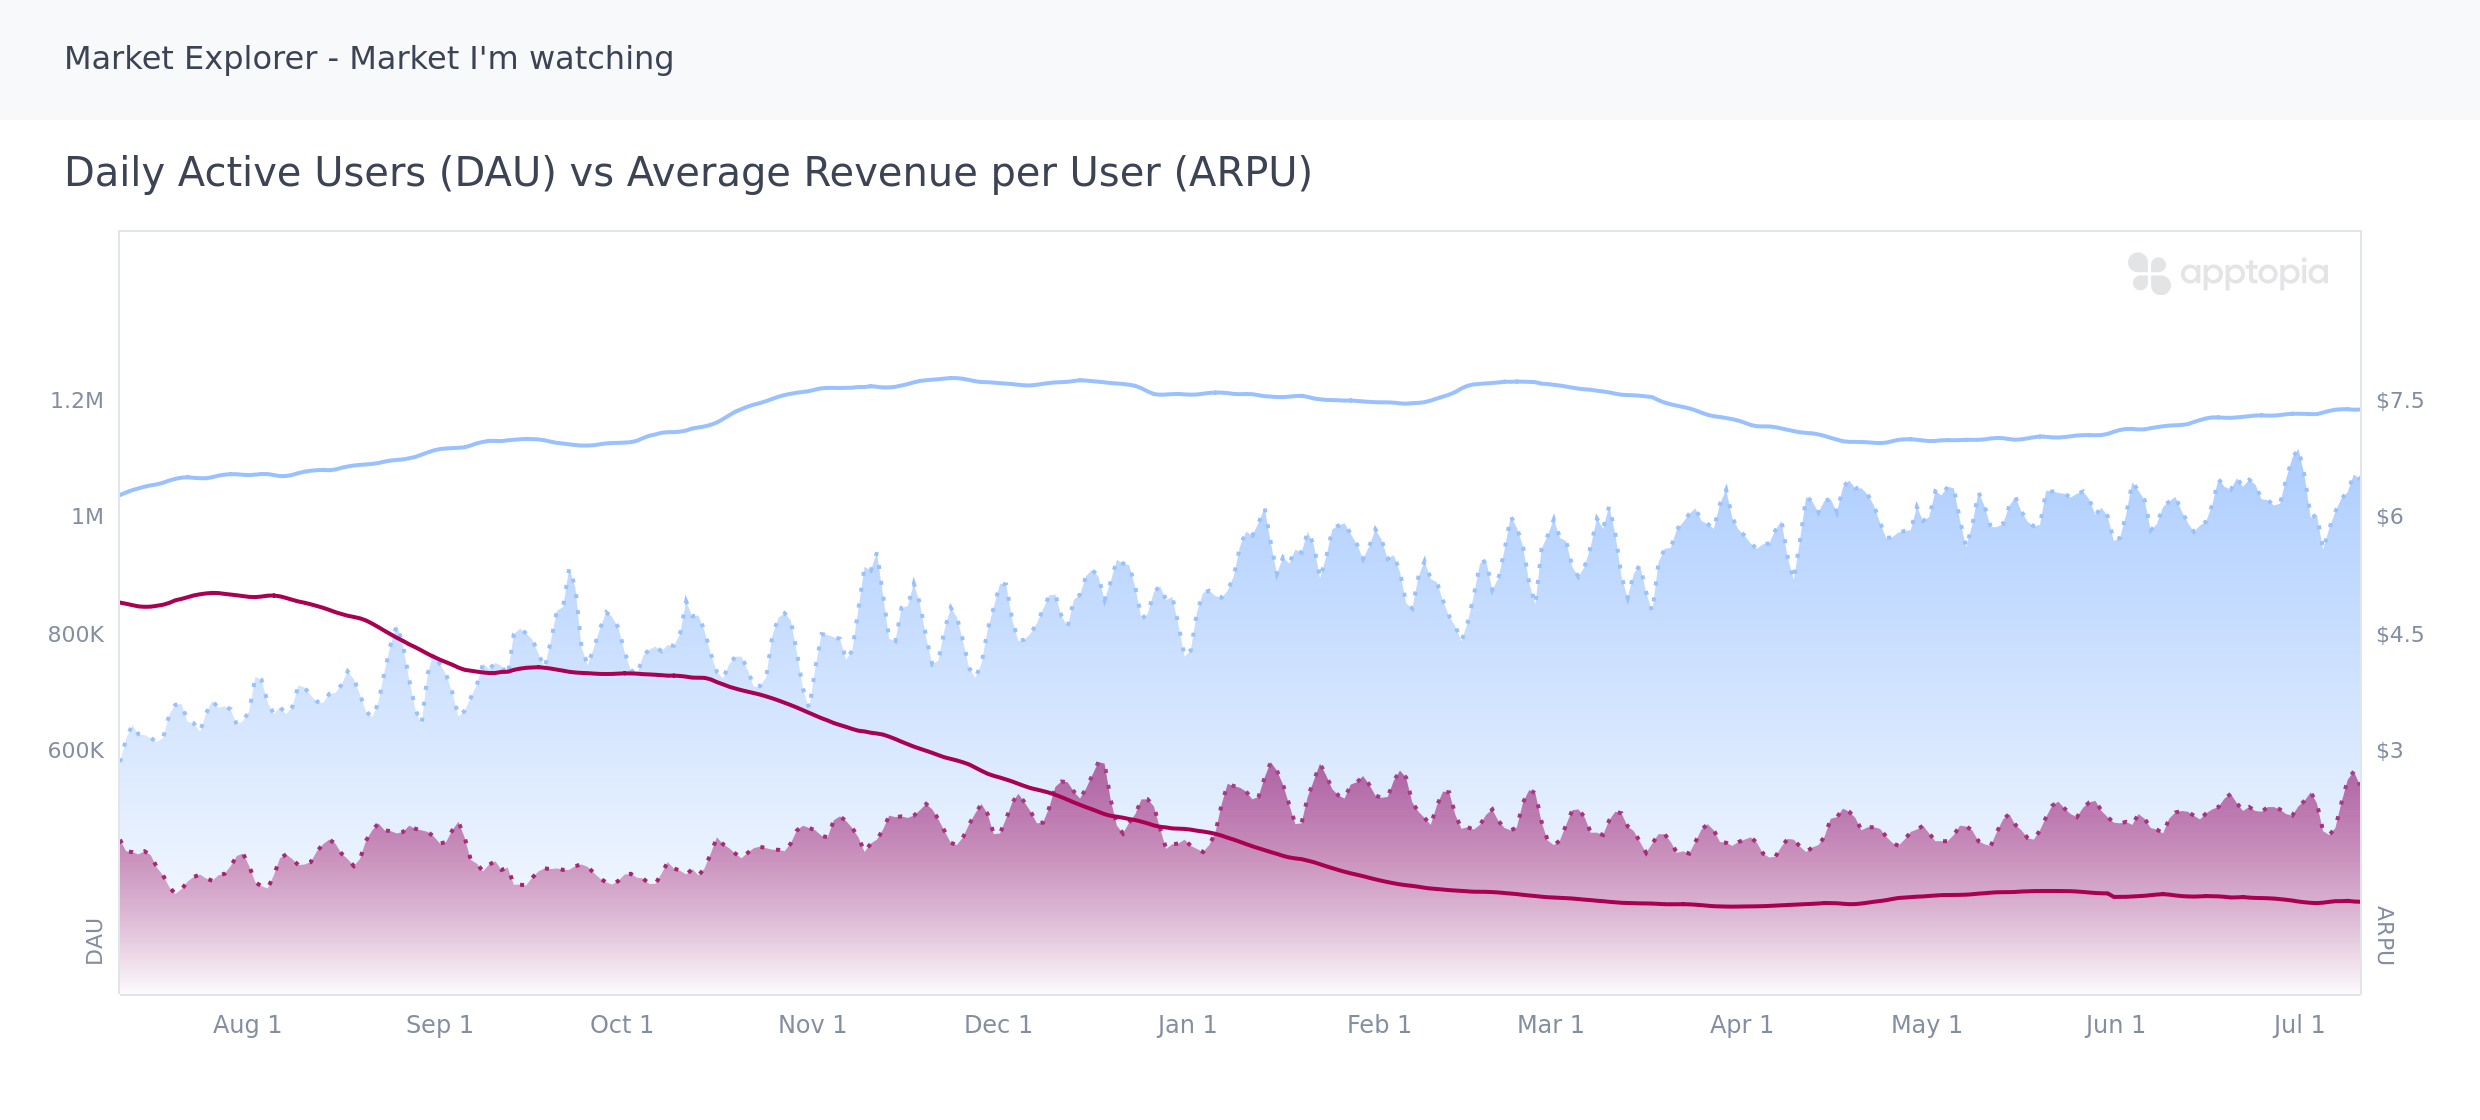 Apptopia Market Explorer allows you to compare Daily Active Users to ARPU